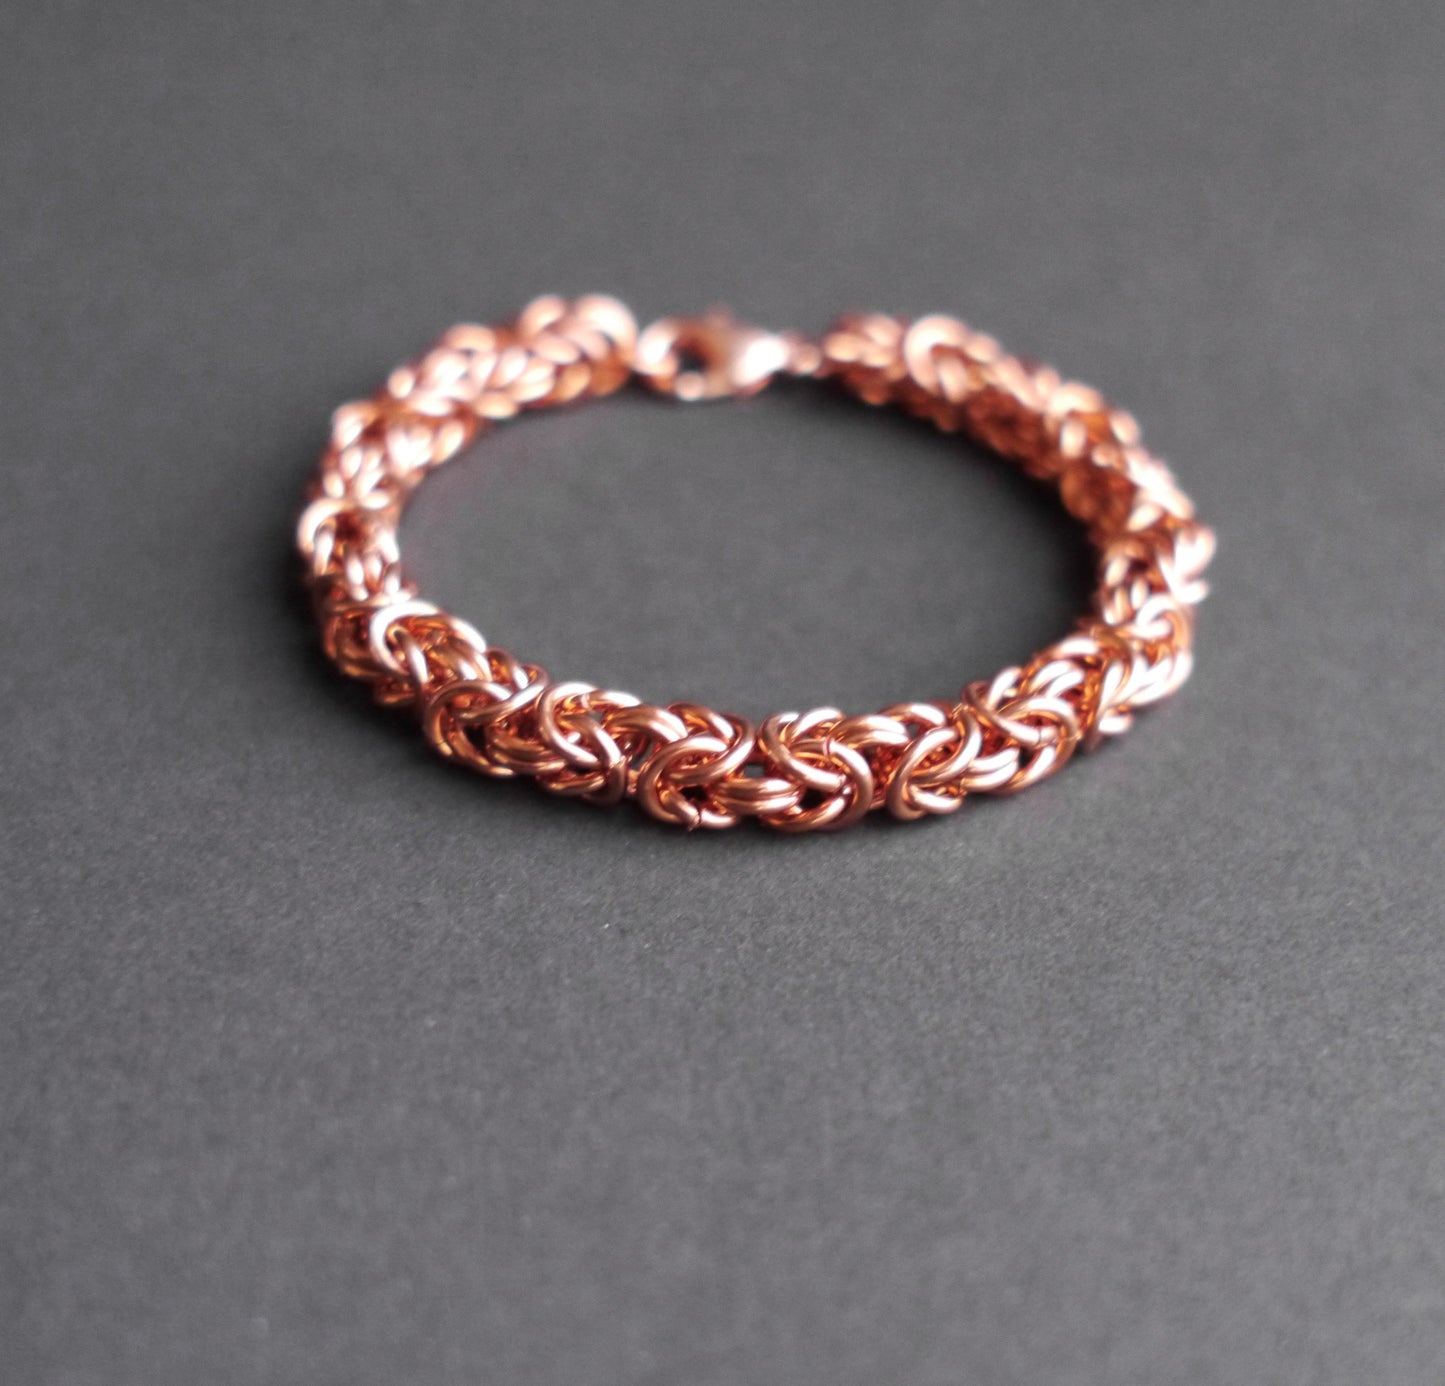 7mm Byzantine Chainmaille Bracelet in Copper